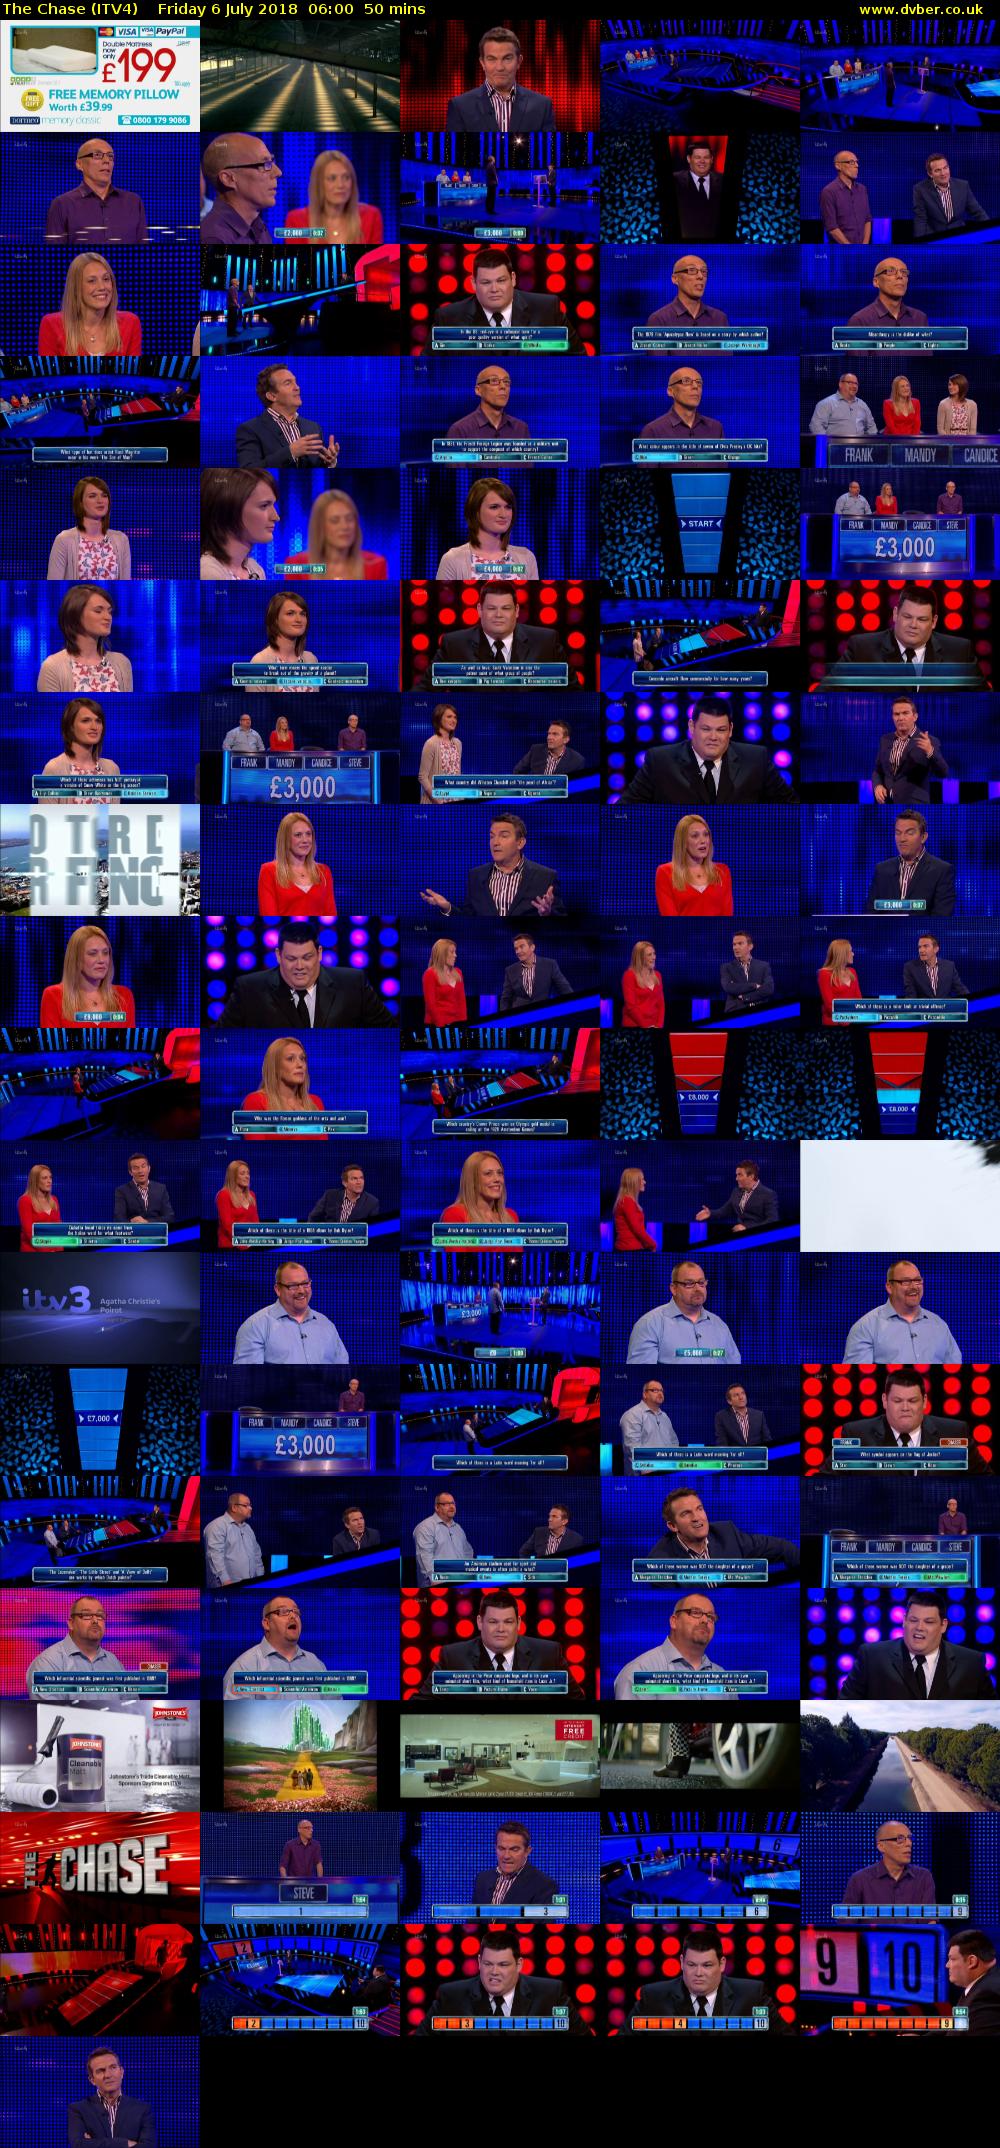 The Chase (ITV4) Friday 6 July 2018 06:00 - 06:50